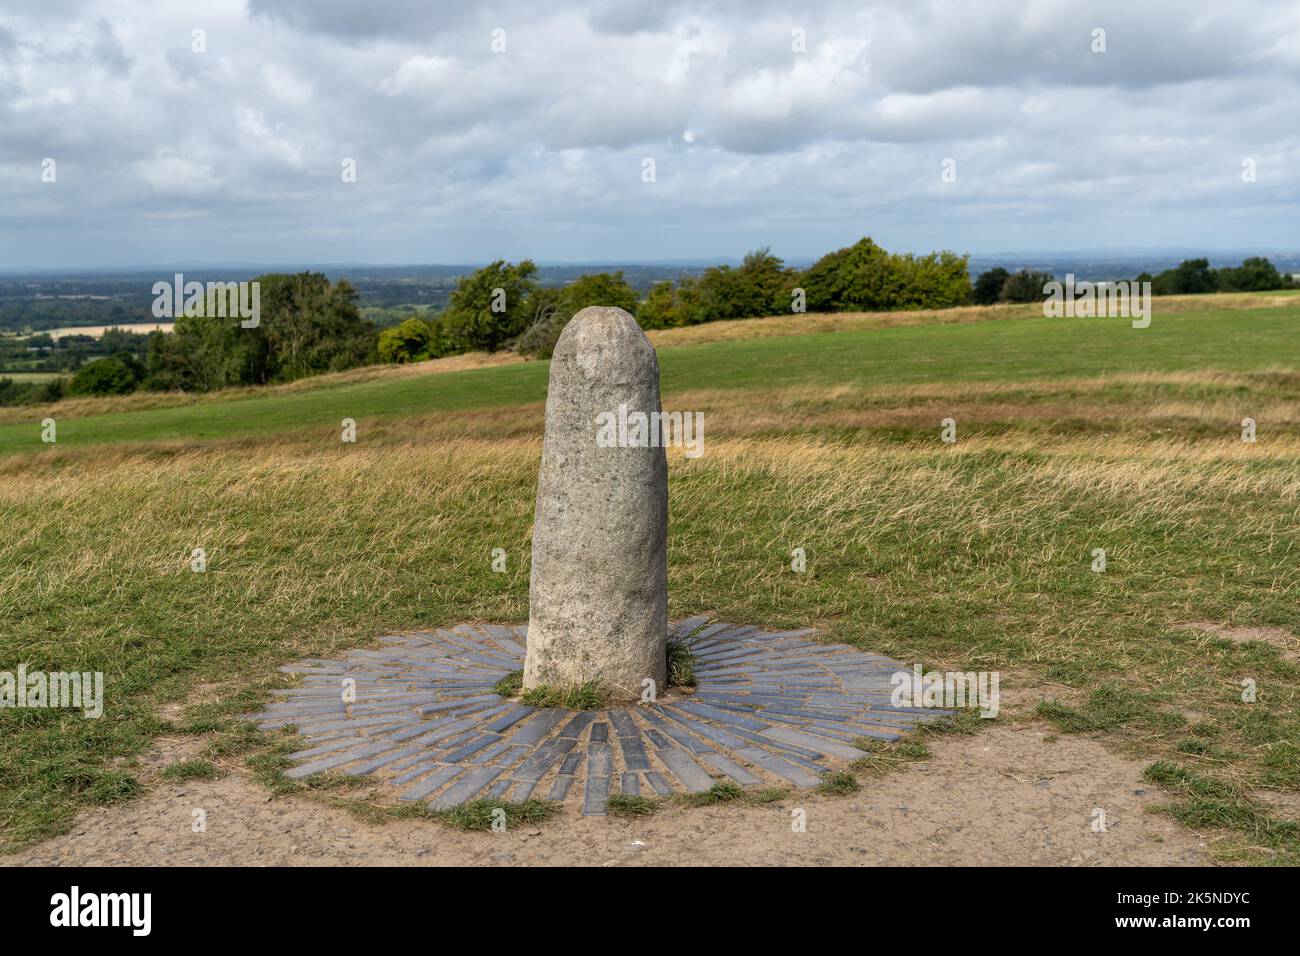 A view of The Stone of Destiny on the Hill of tara in County Meath in Ireland Stock Photo